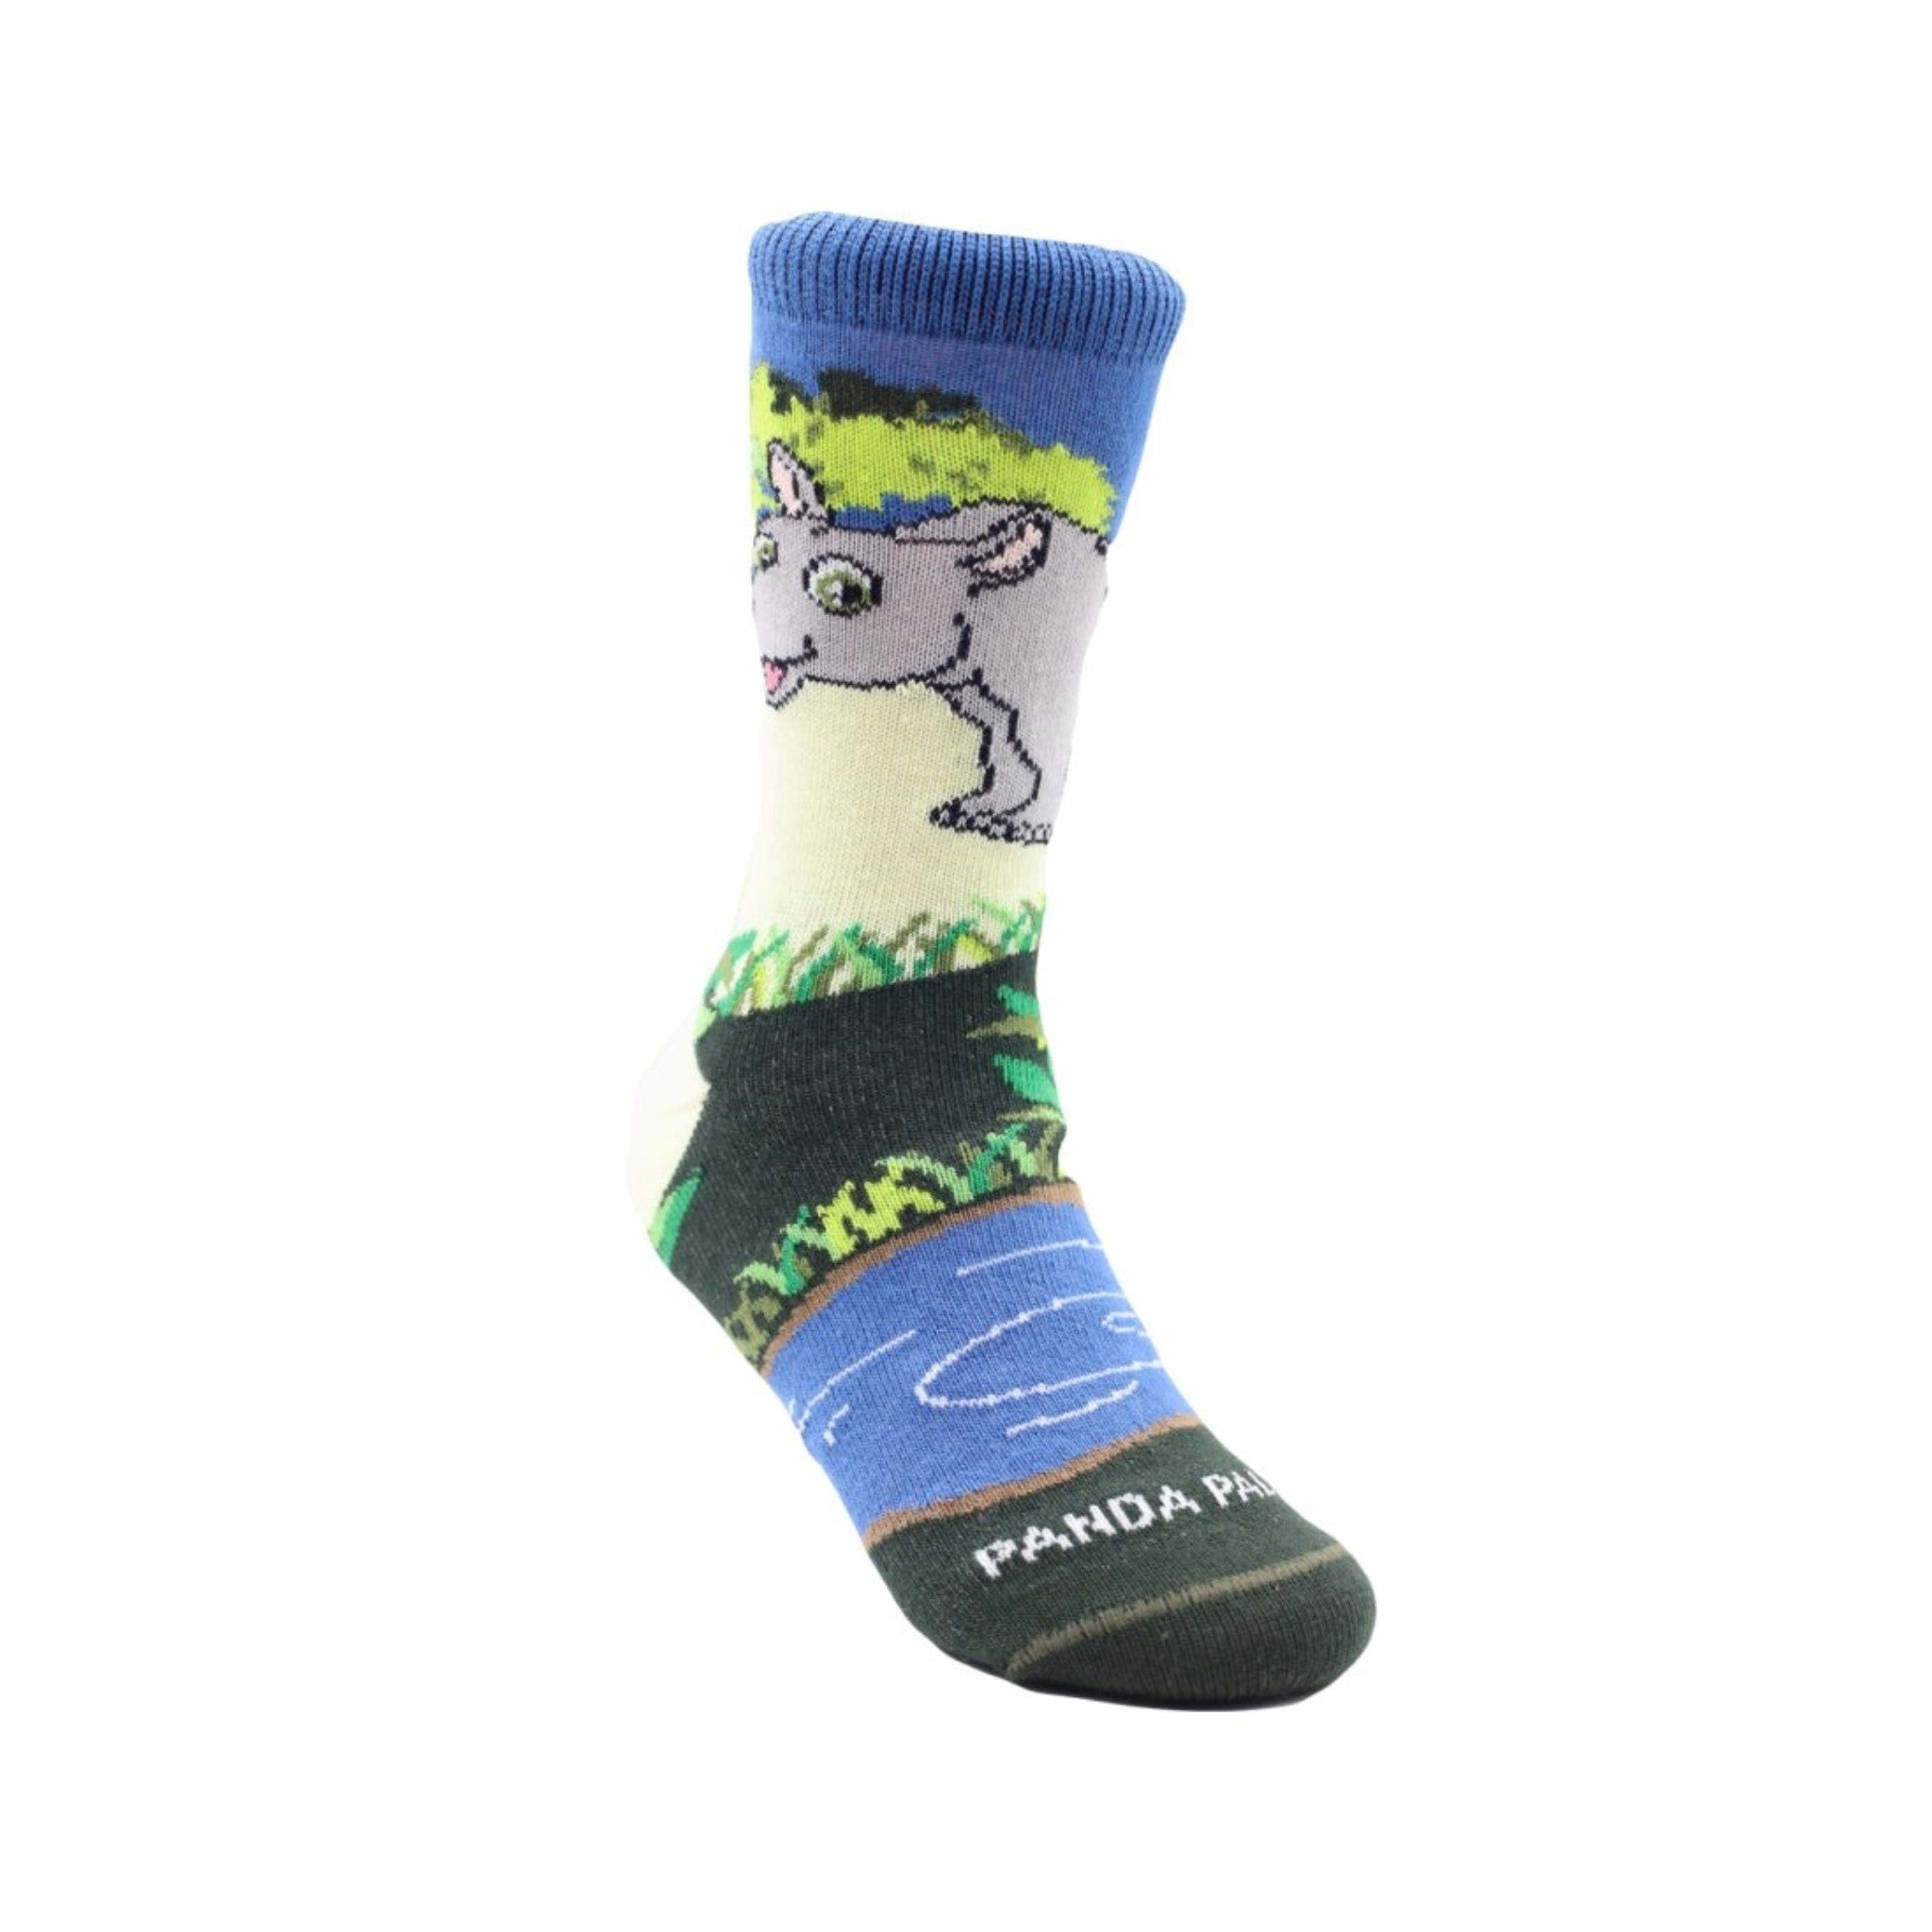 Thabo the Awesome (Rhino Socks) - Ages 3-7